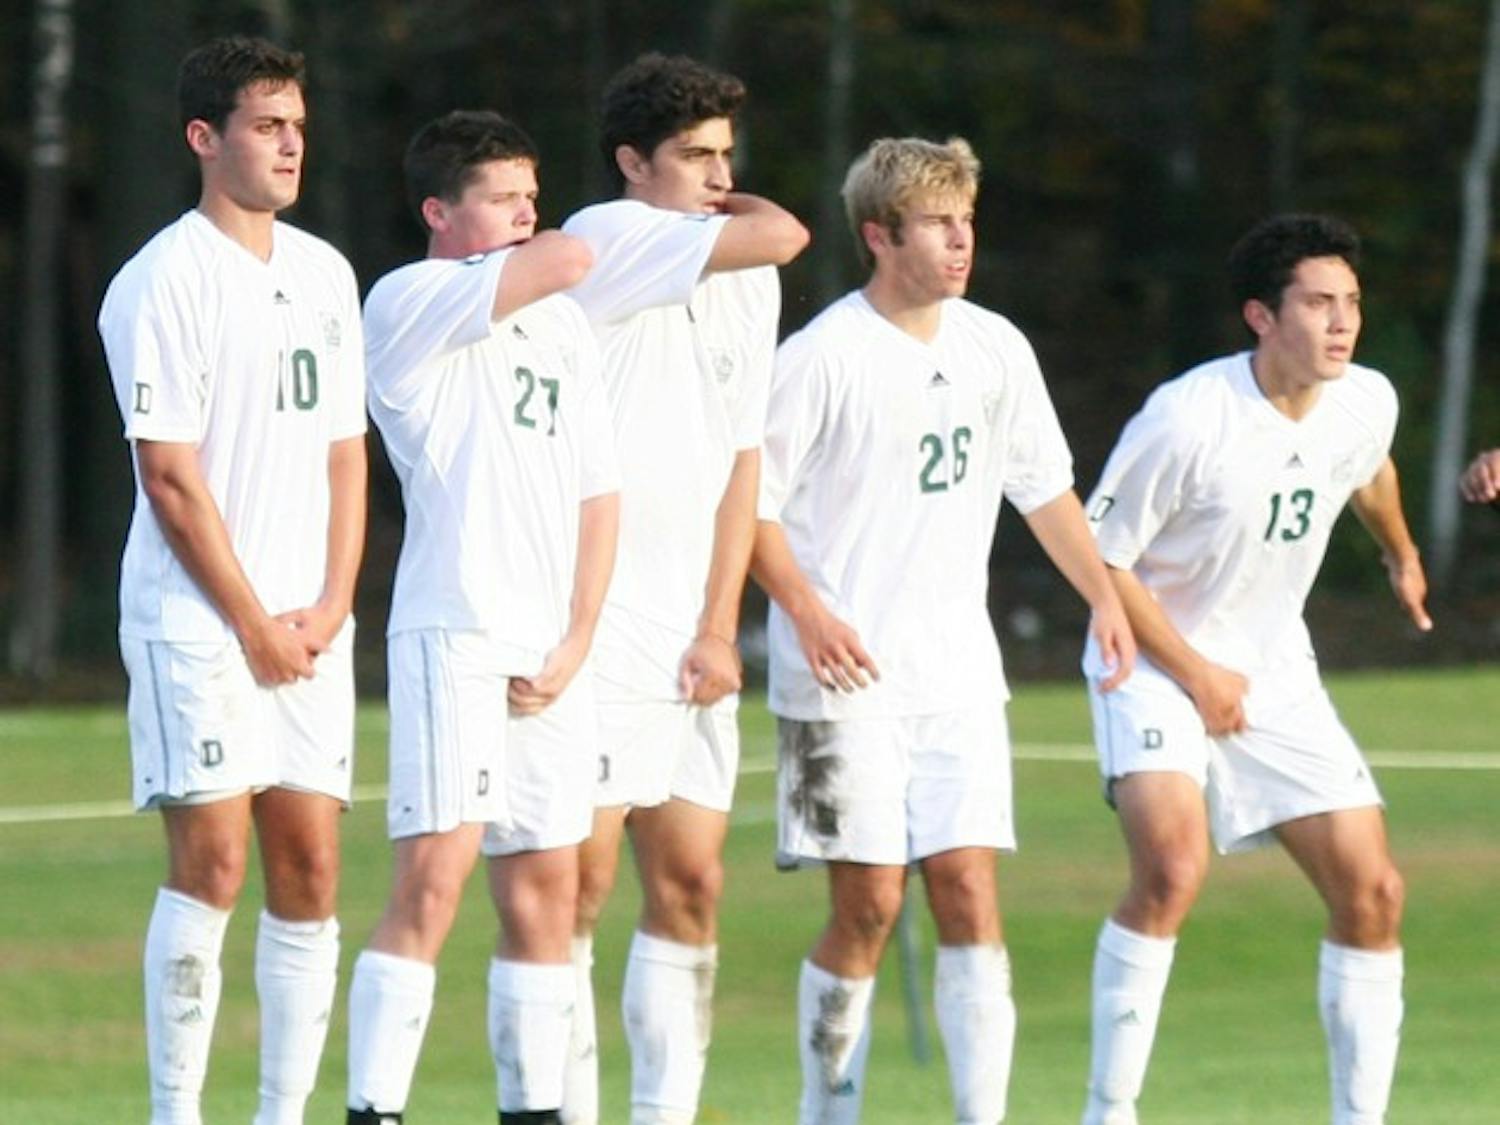 The men's soccer team will welcome a talented group of nine freshmen and a transfer onto its 2007 roster.